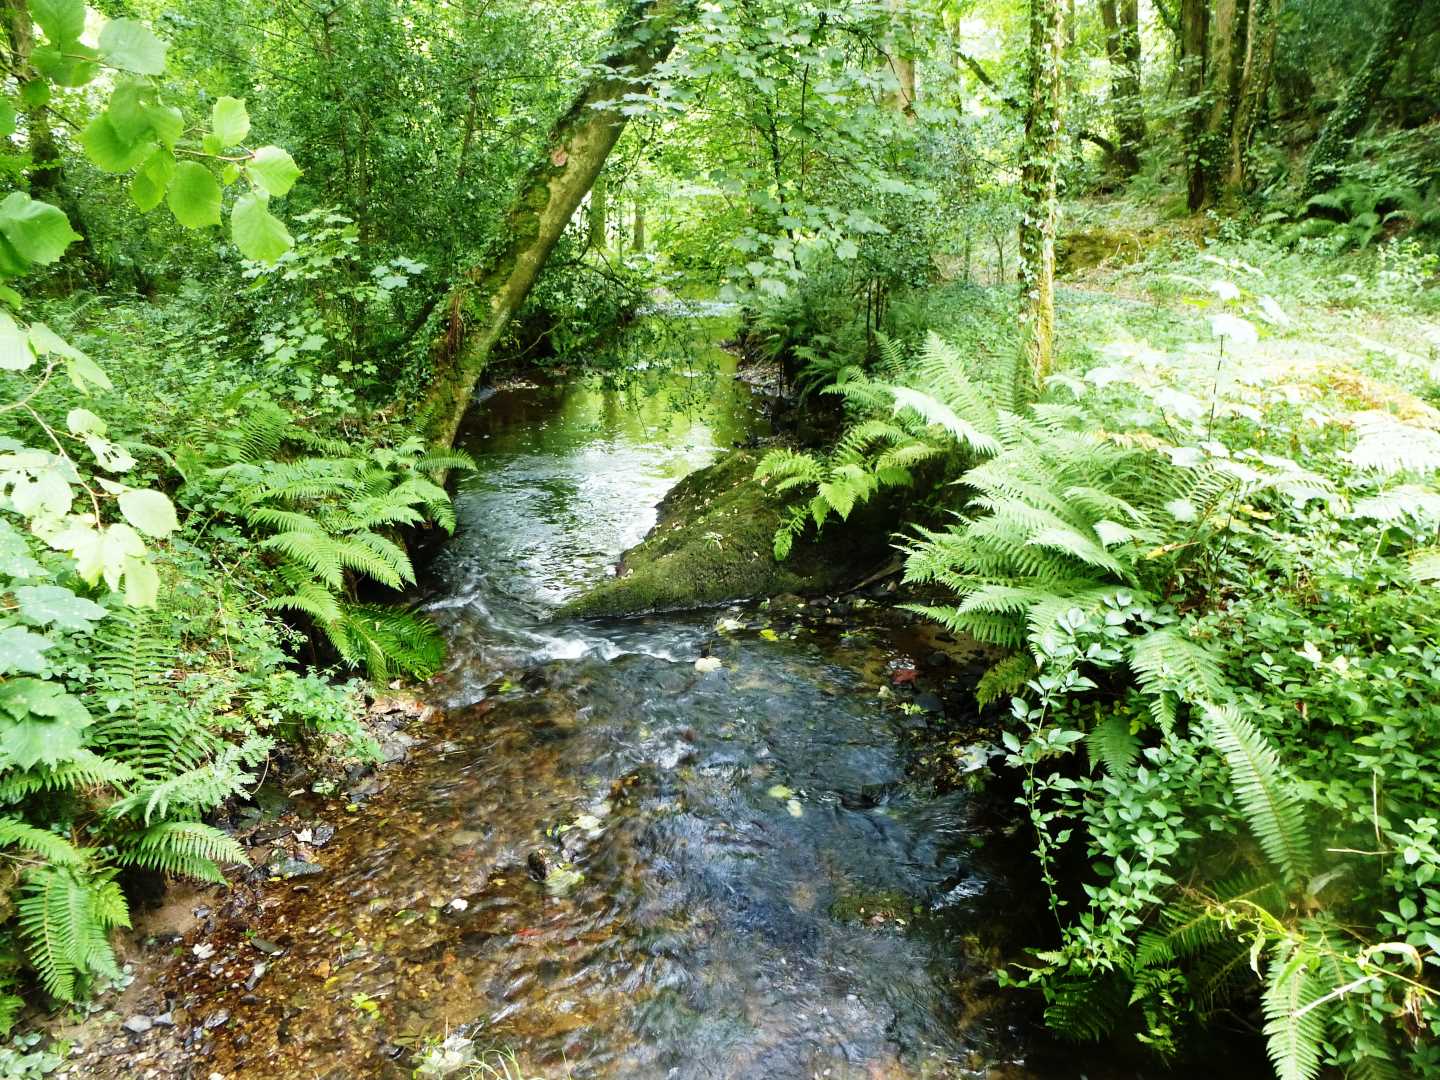 The river menalhyl surrounded by ferns